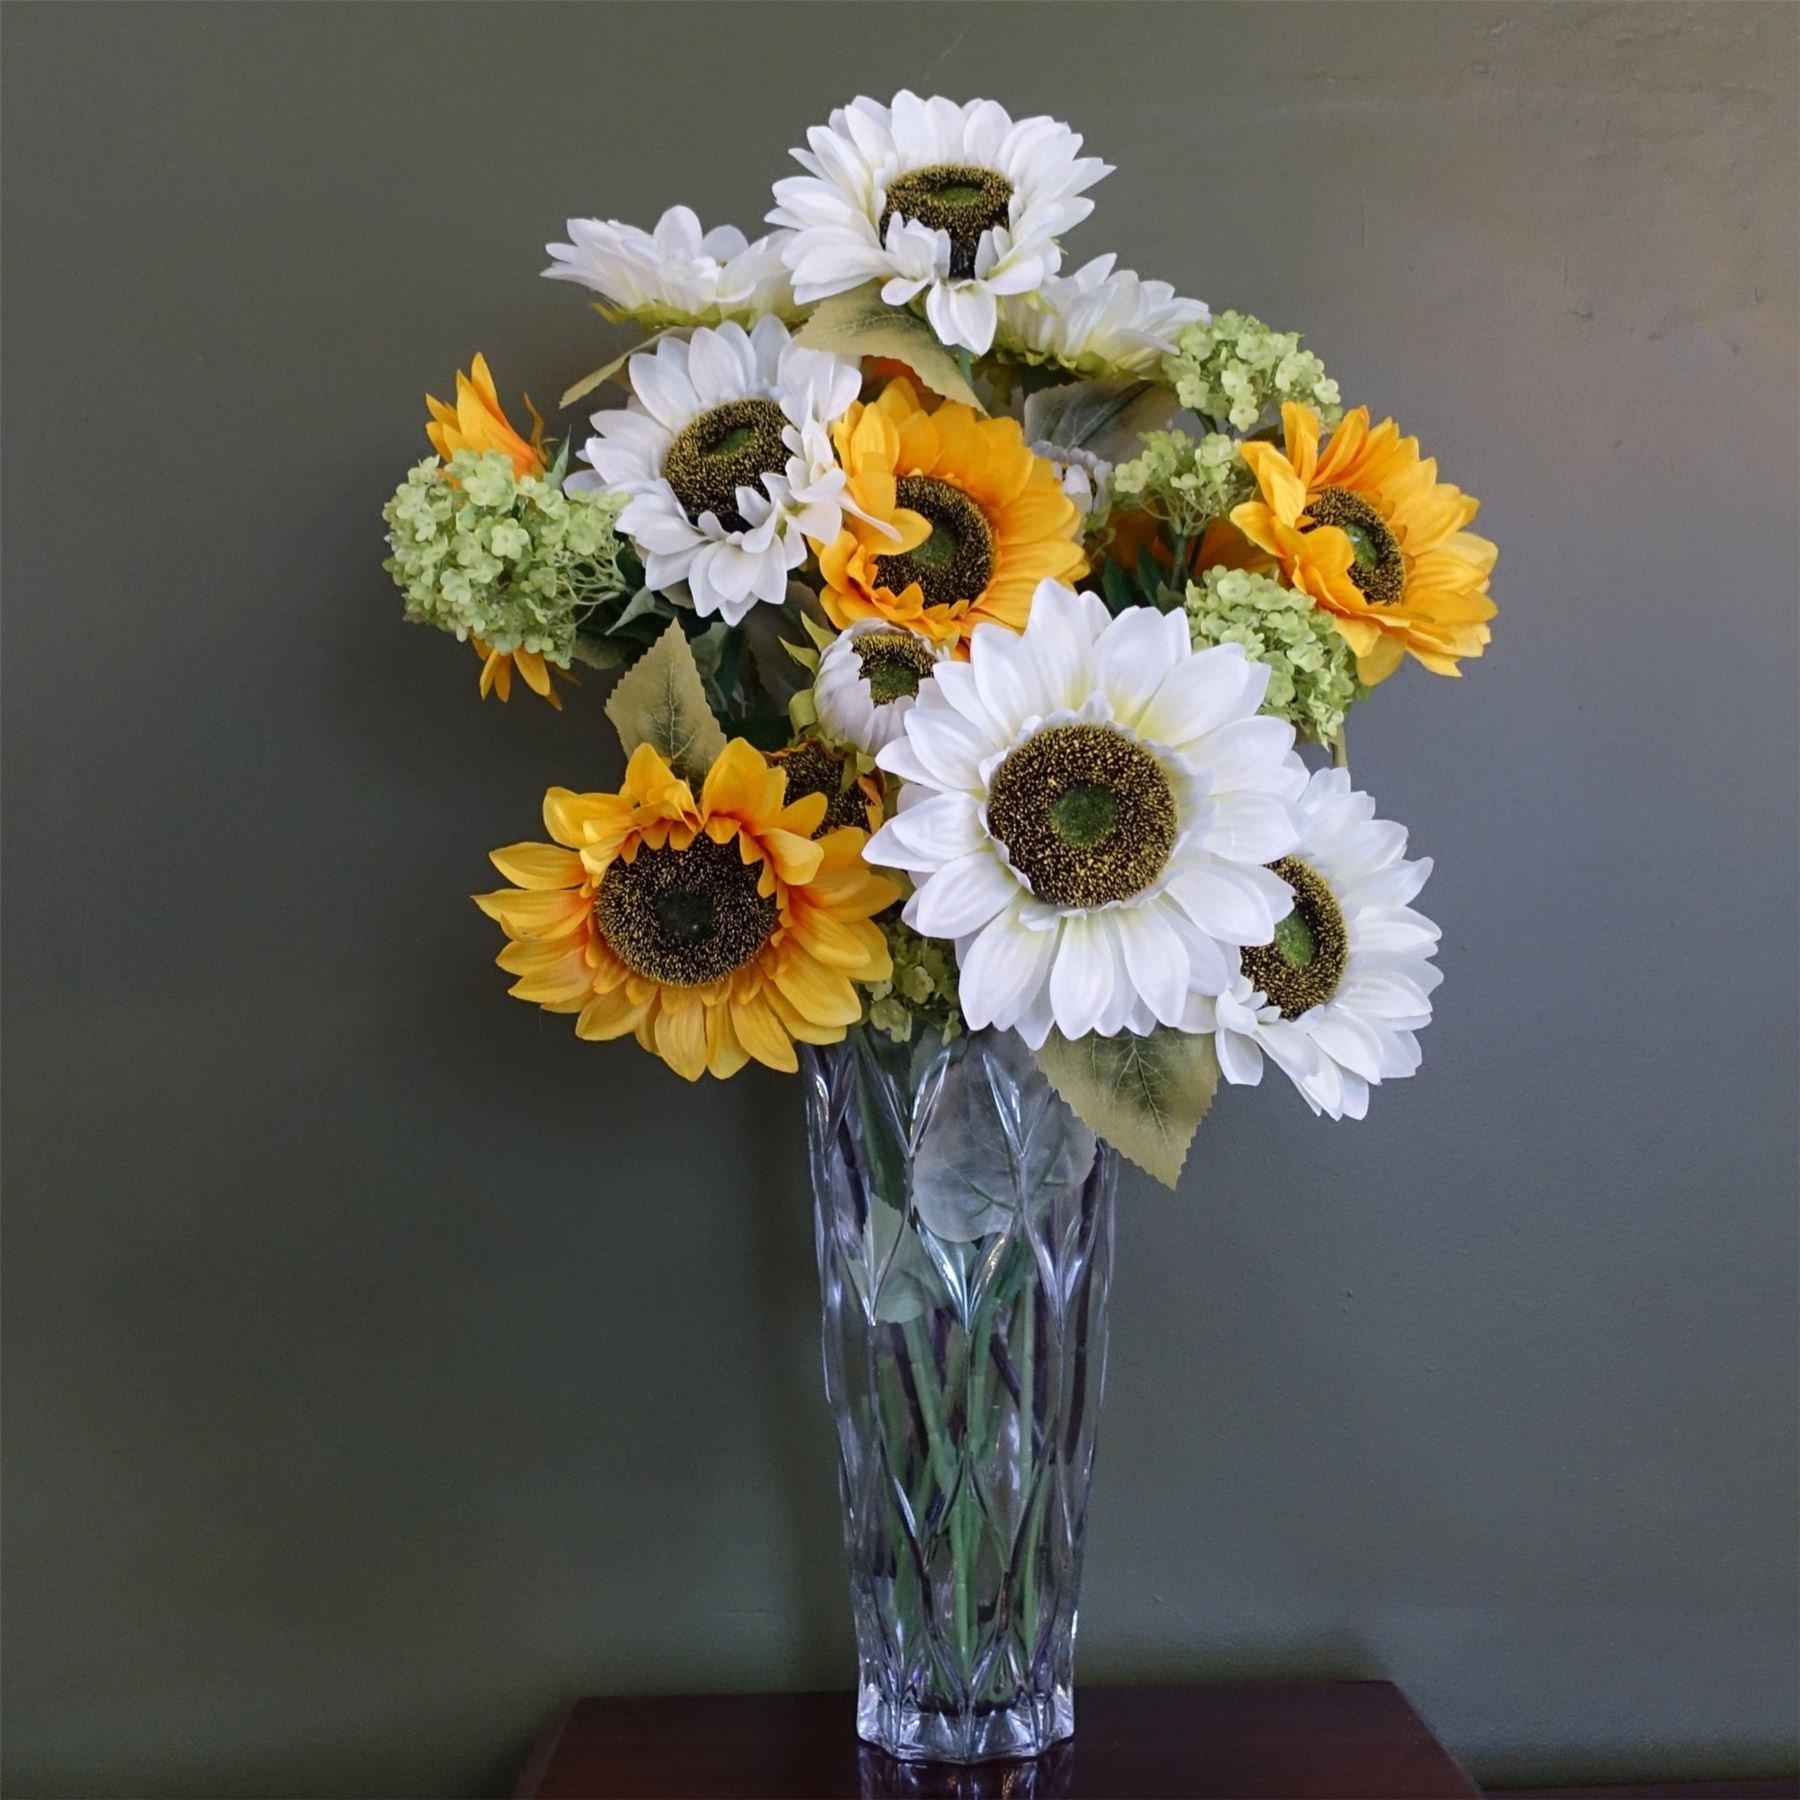 Leaf 80cm White and Yellow Sunflower Mix Glass Vase